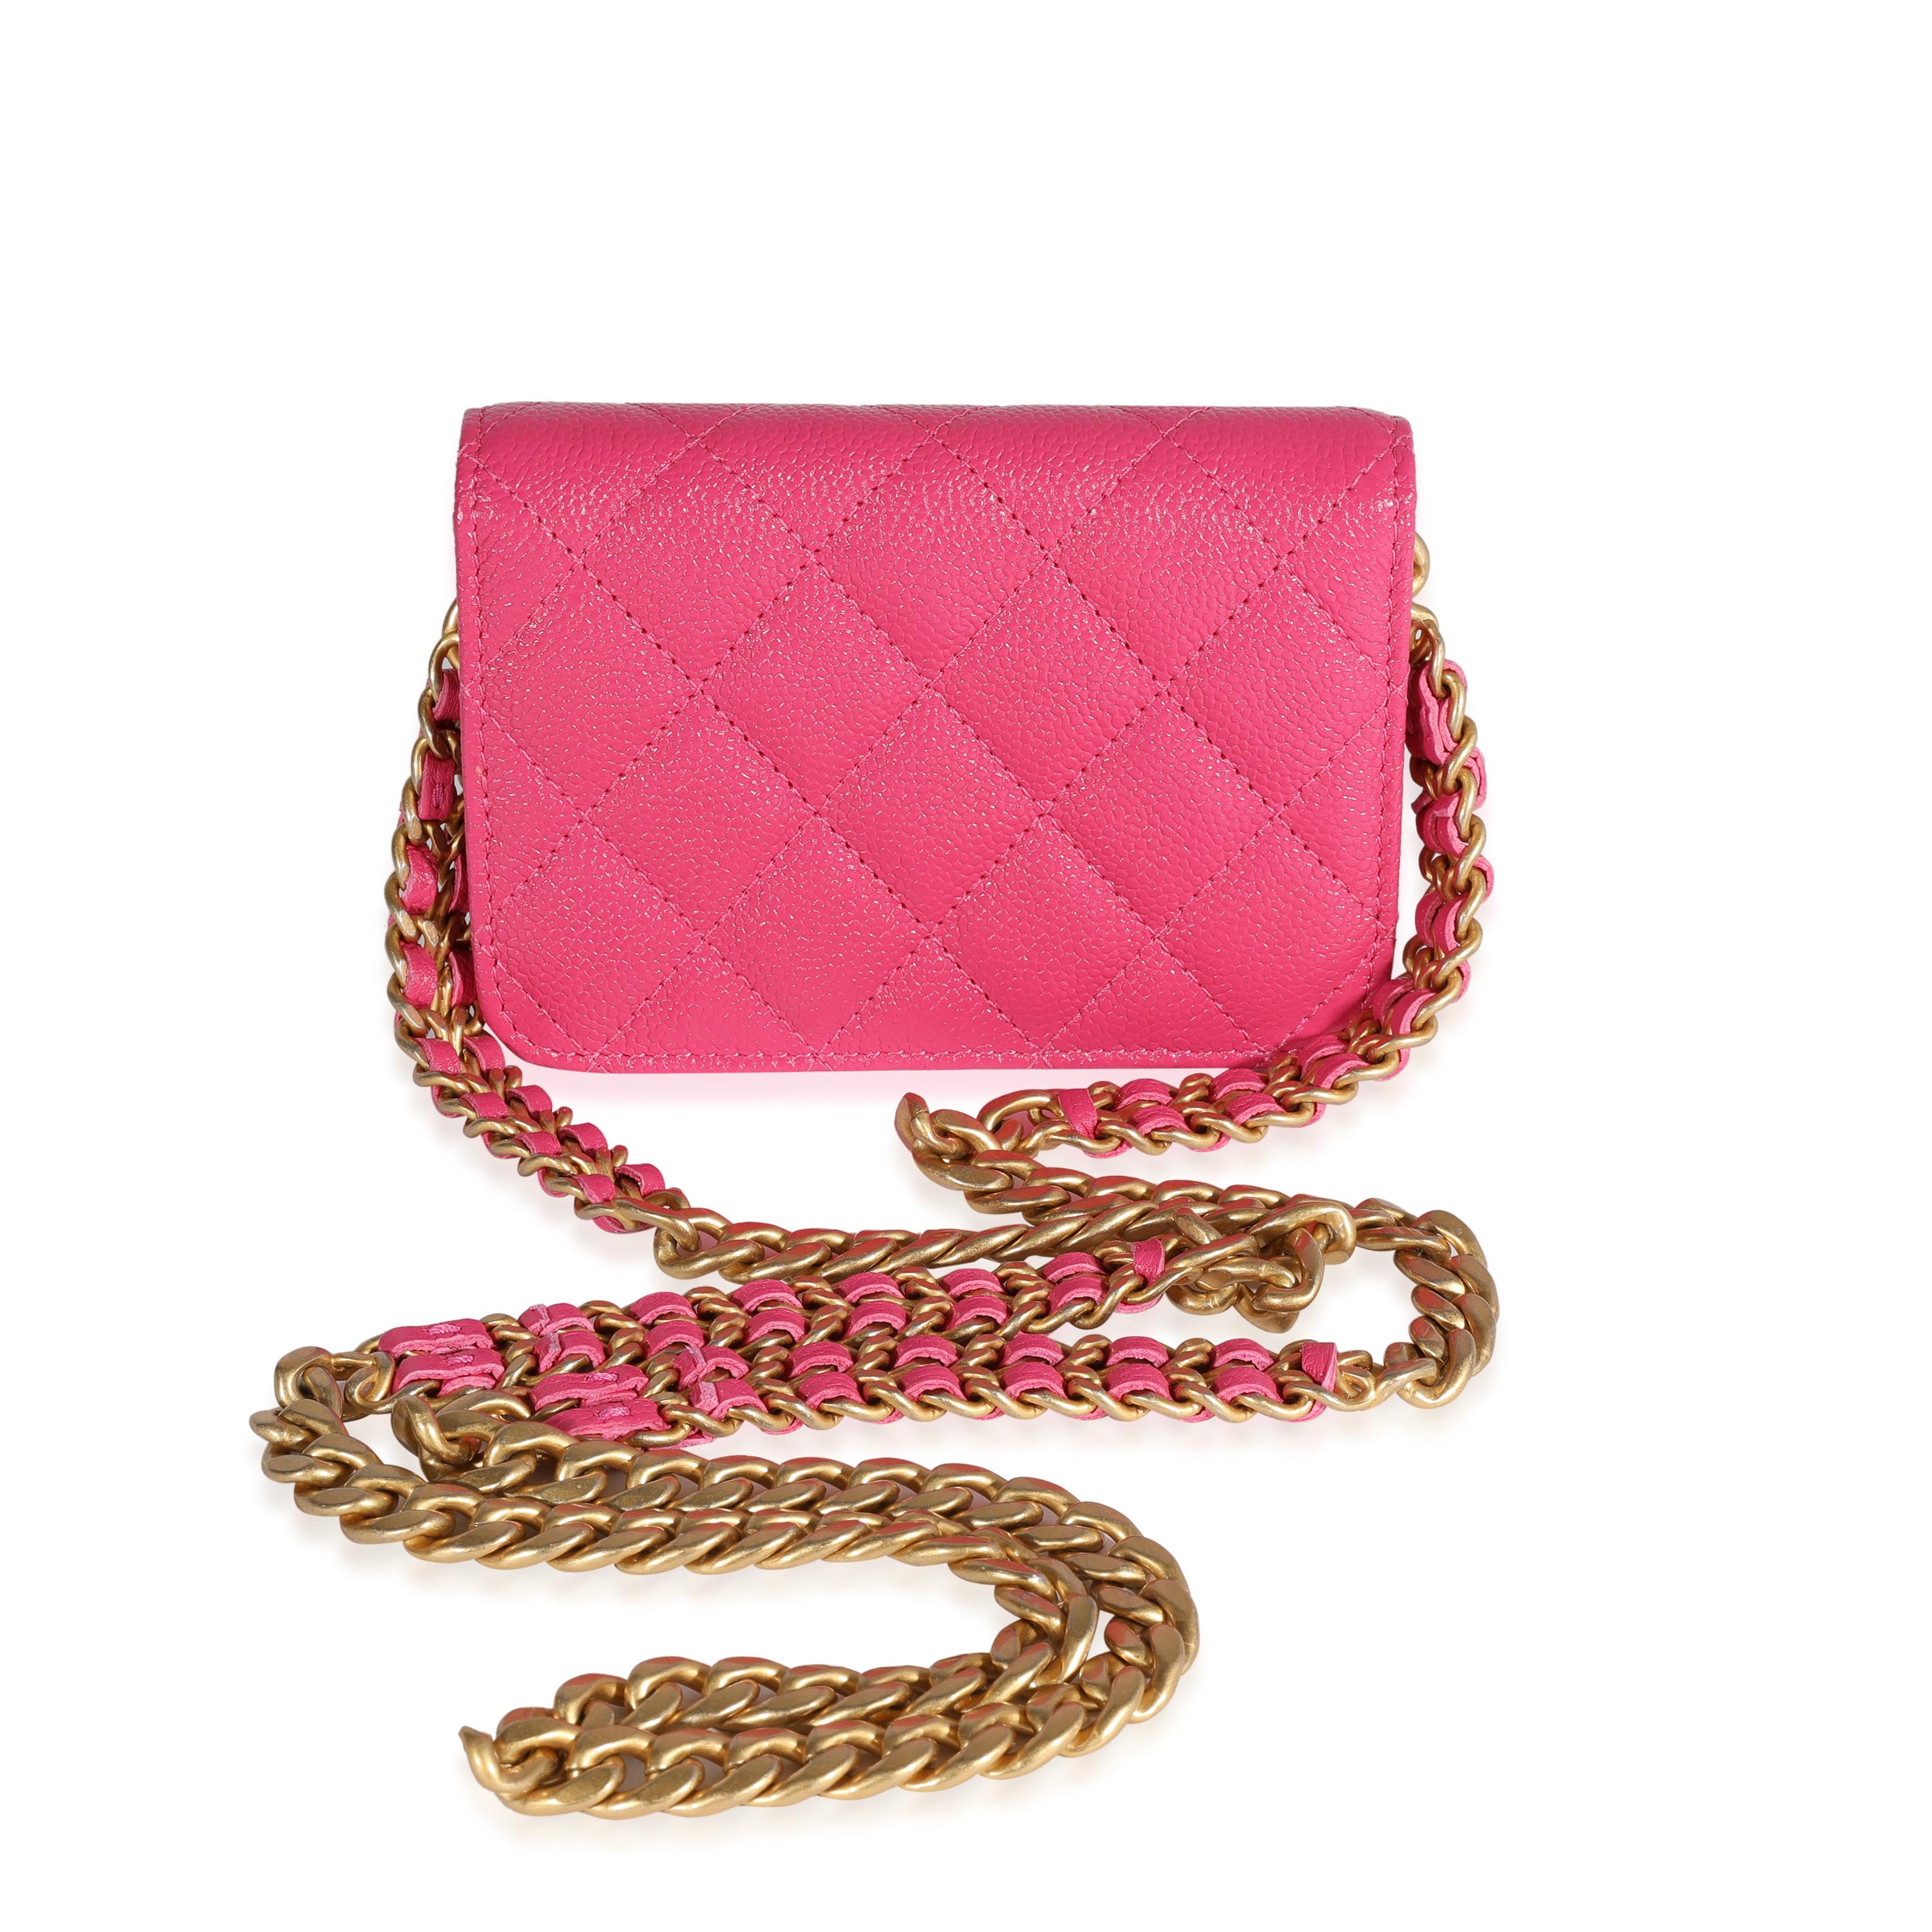 Listing Title: Chanel Dark Pink Quilted Caviar Melody Coin Purse With Chain
SKU: 120754
MSRP: 2250.00
Condition: Pre-owned 
Handbag Condition: Excellent
Condition Comments: Excellent Condition. No visible signs of wear.
Brand: Chanel
Model: Melody